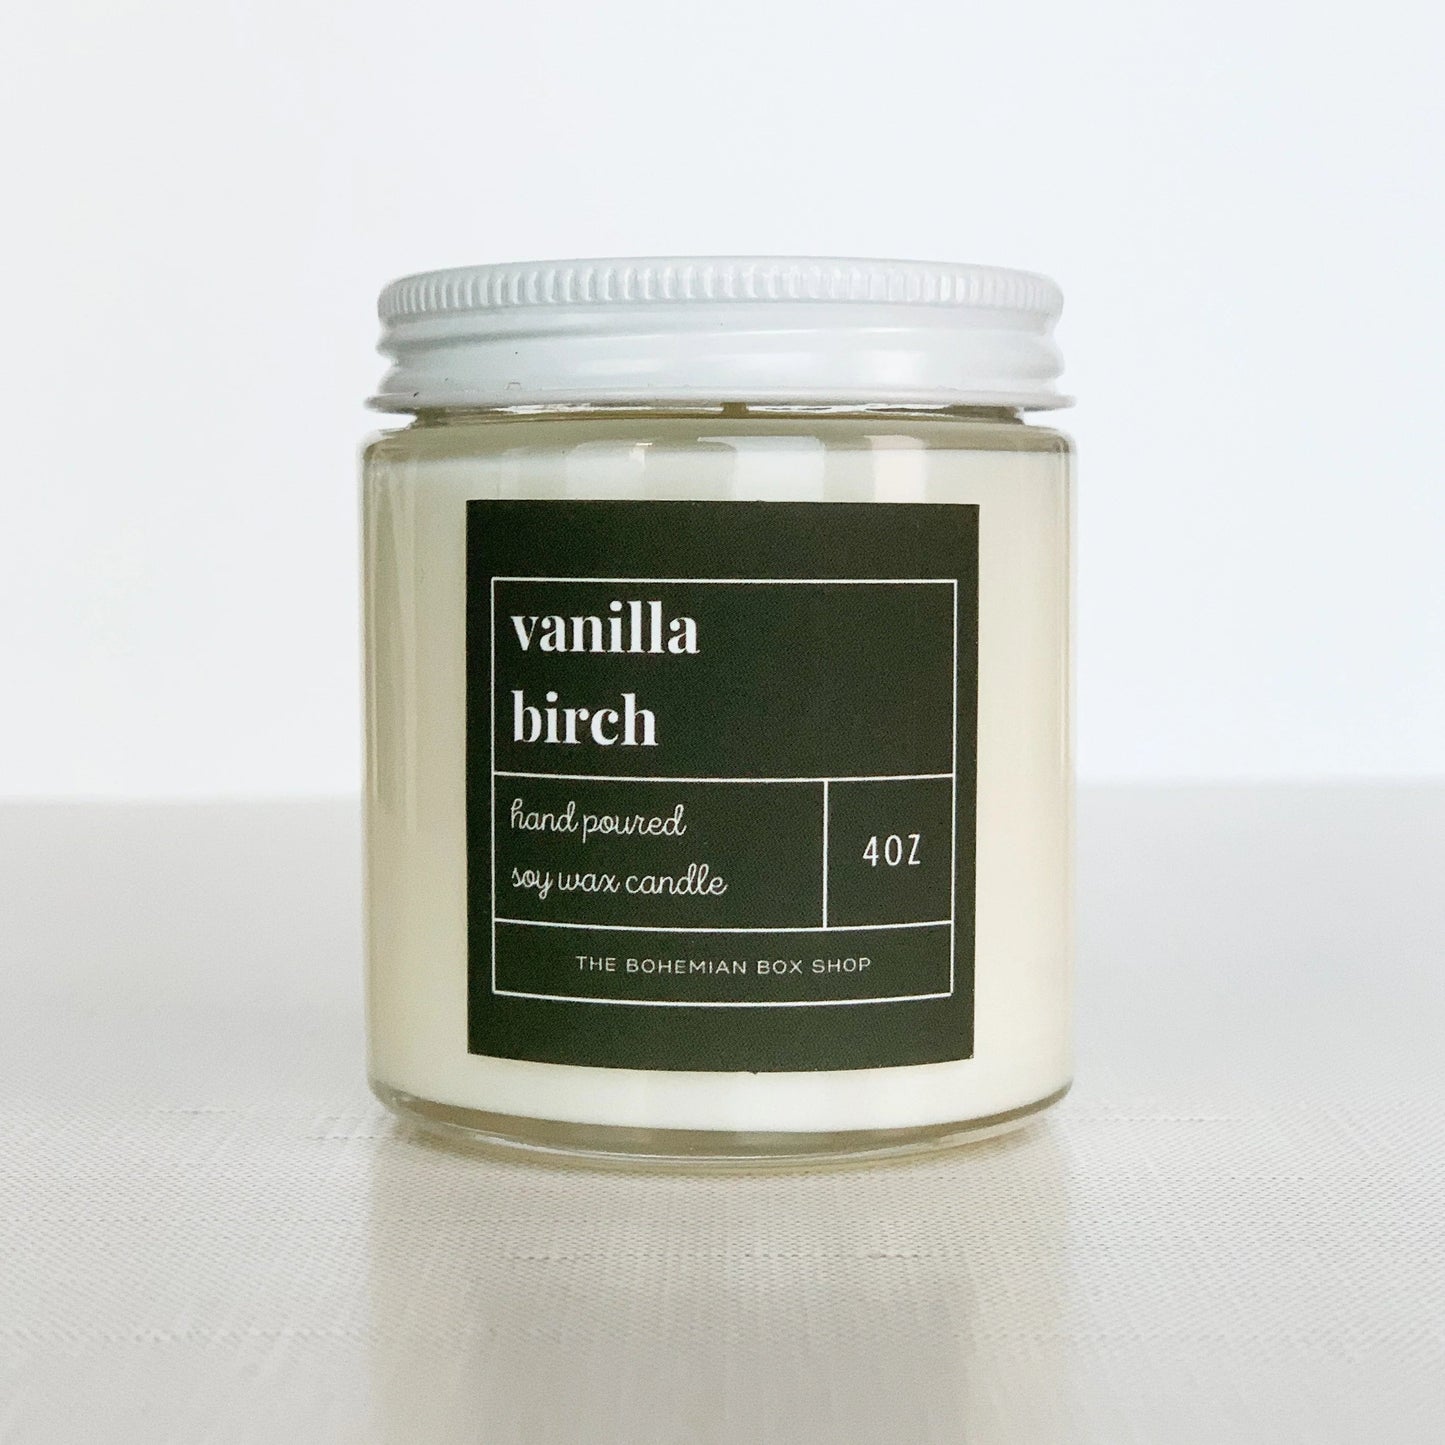 4 ounce vanilla birch, soy candle in a clear jar with white lid.￼